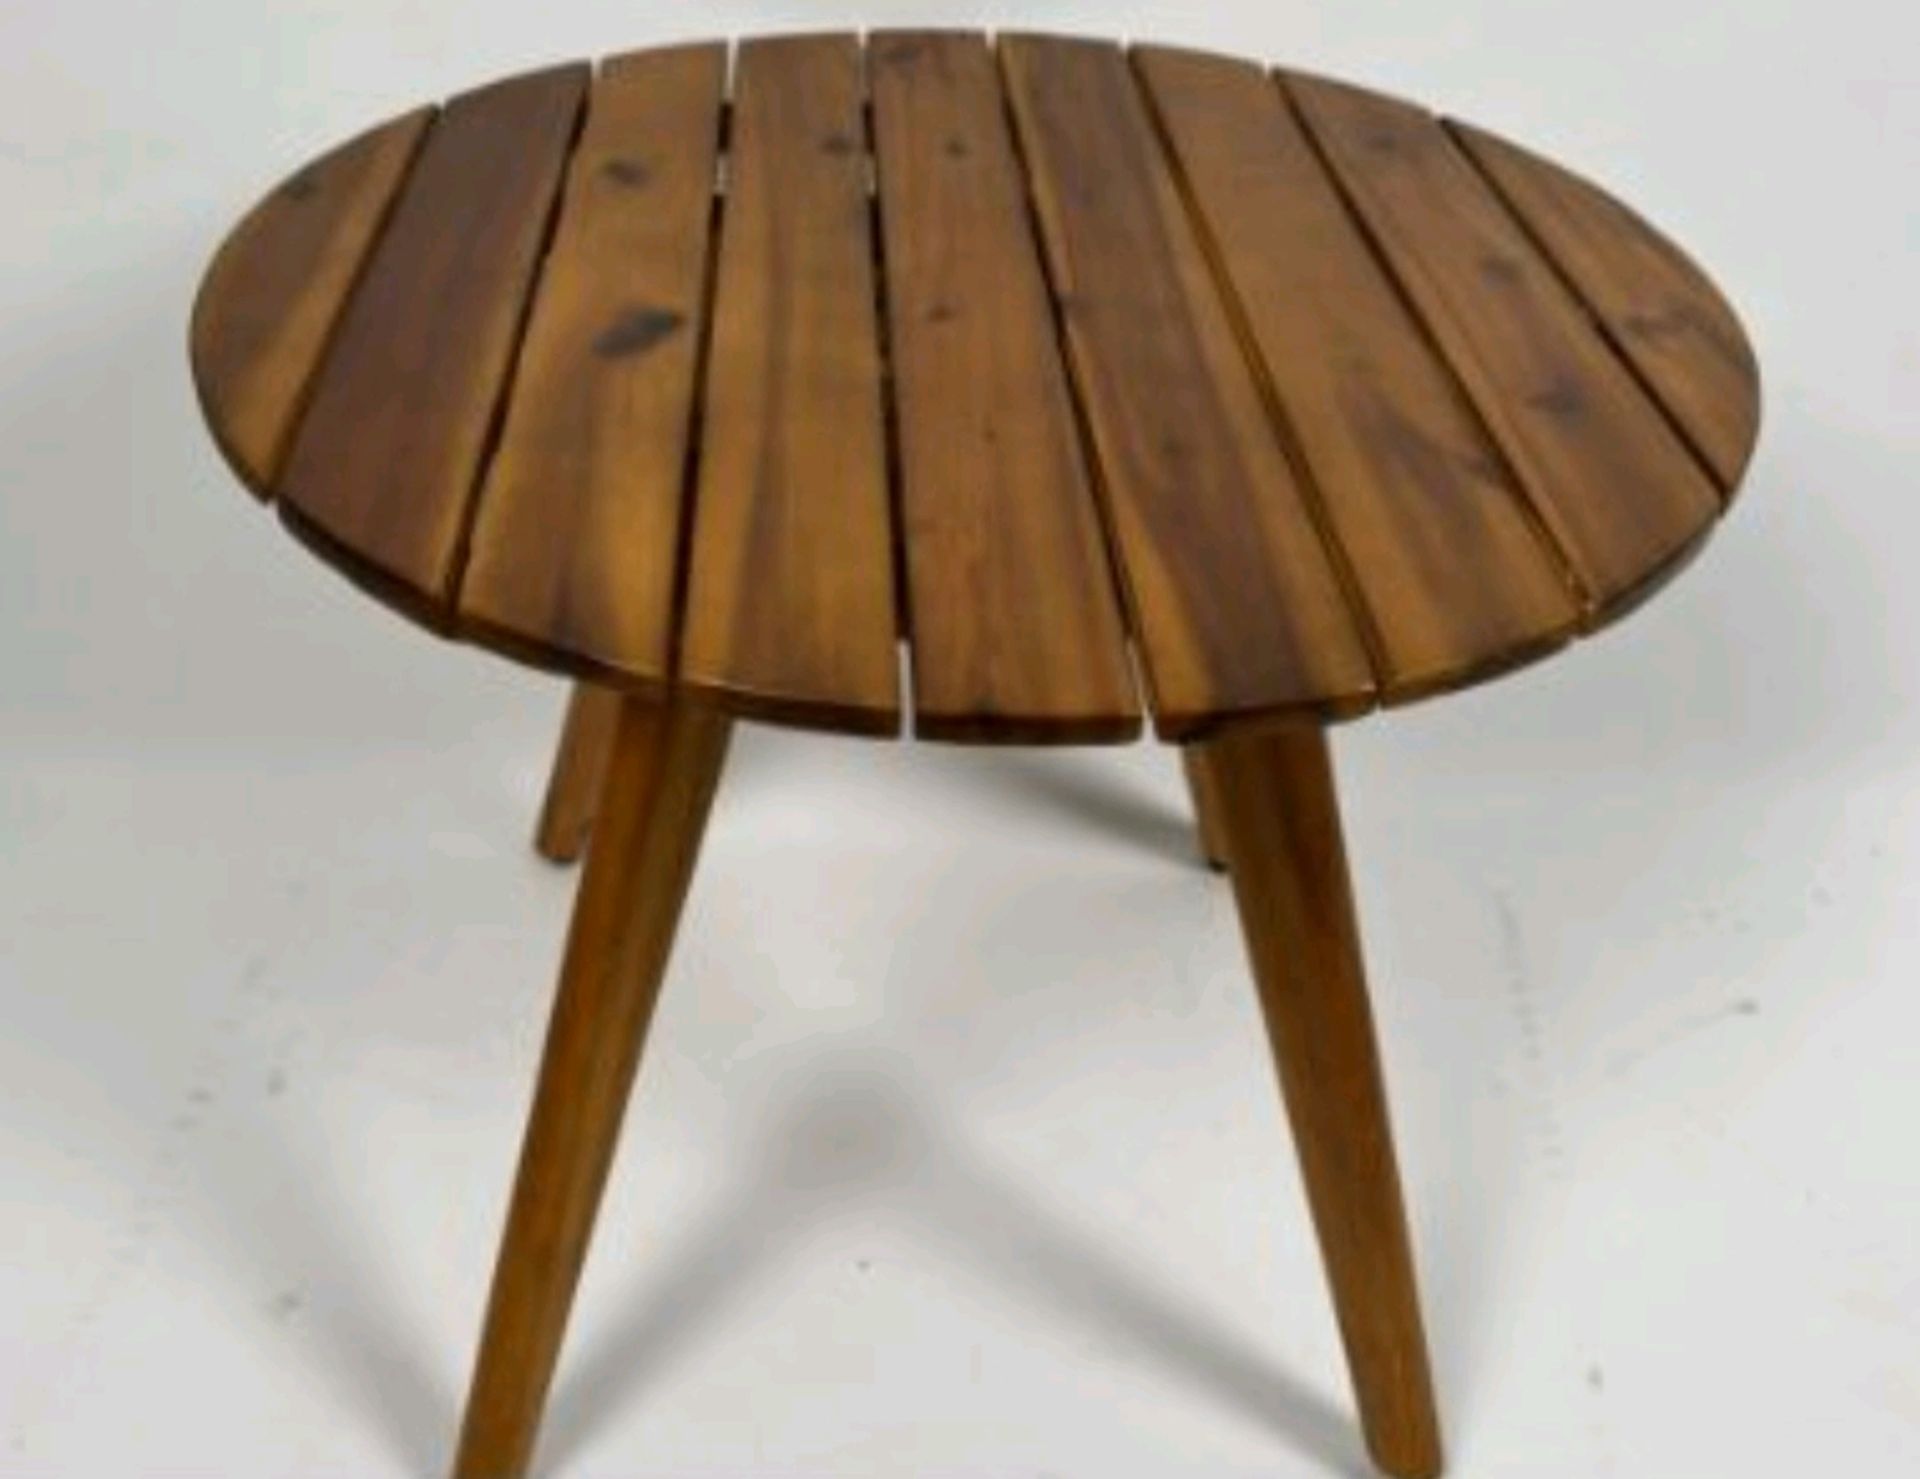 Wooden Circular Side Table - Image 2 of 3